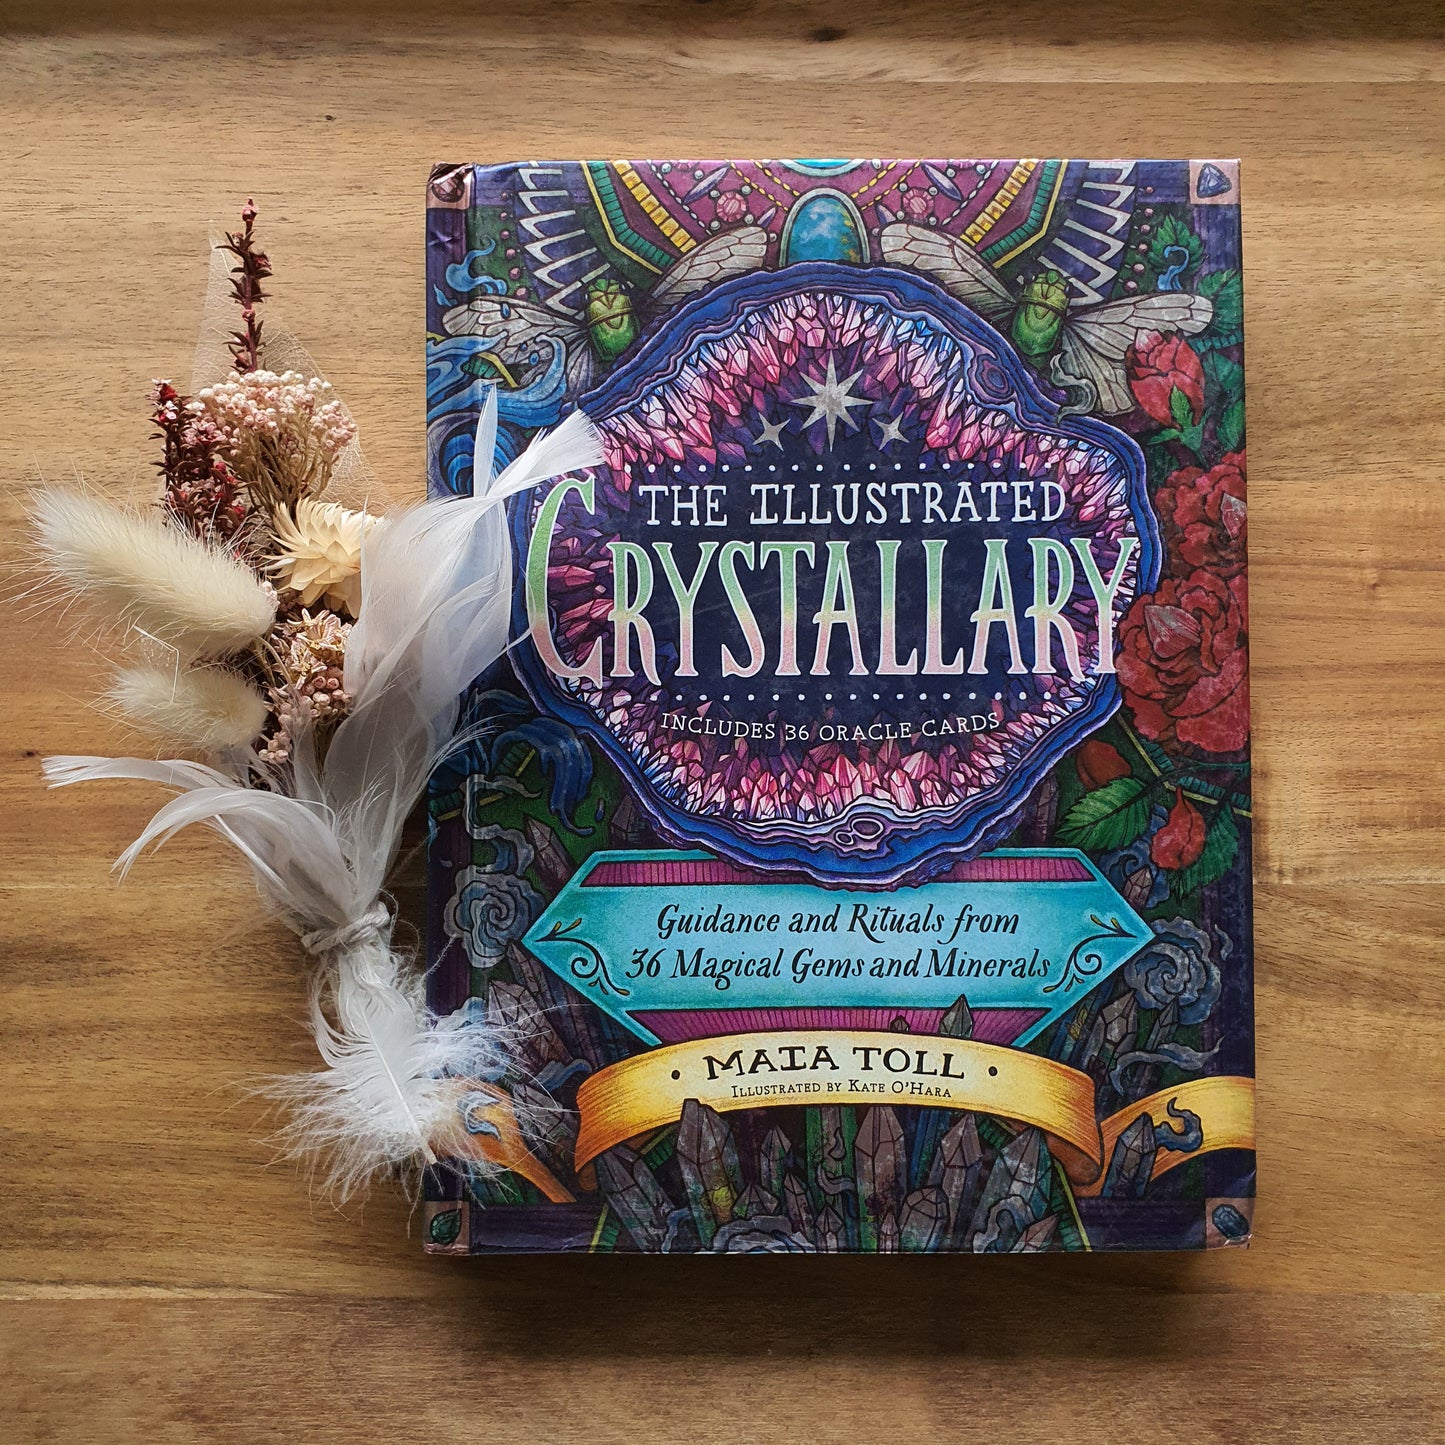 The Illustrated Crystallary: Guidance and Rituals from 36 Magical Gems & Minerals